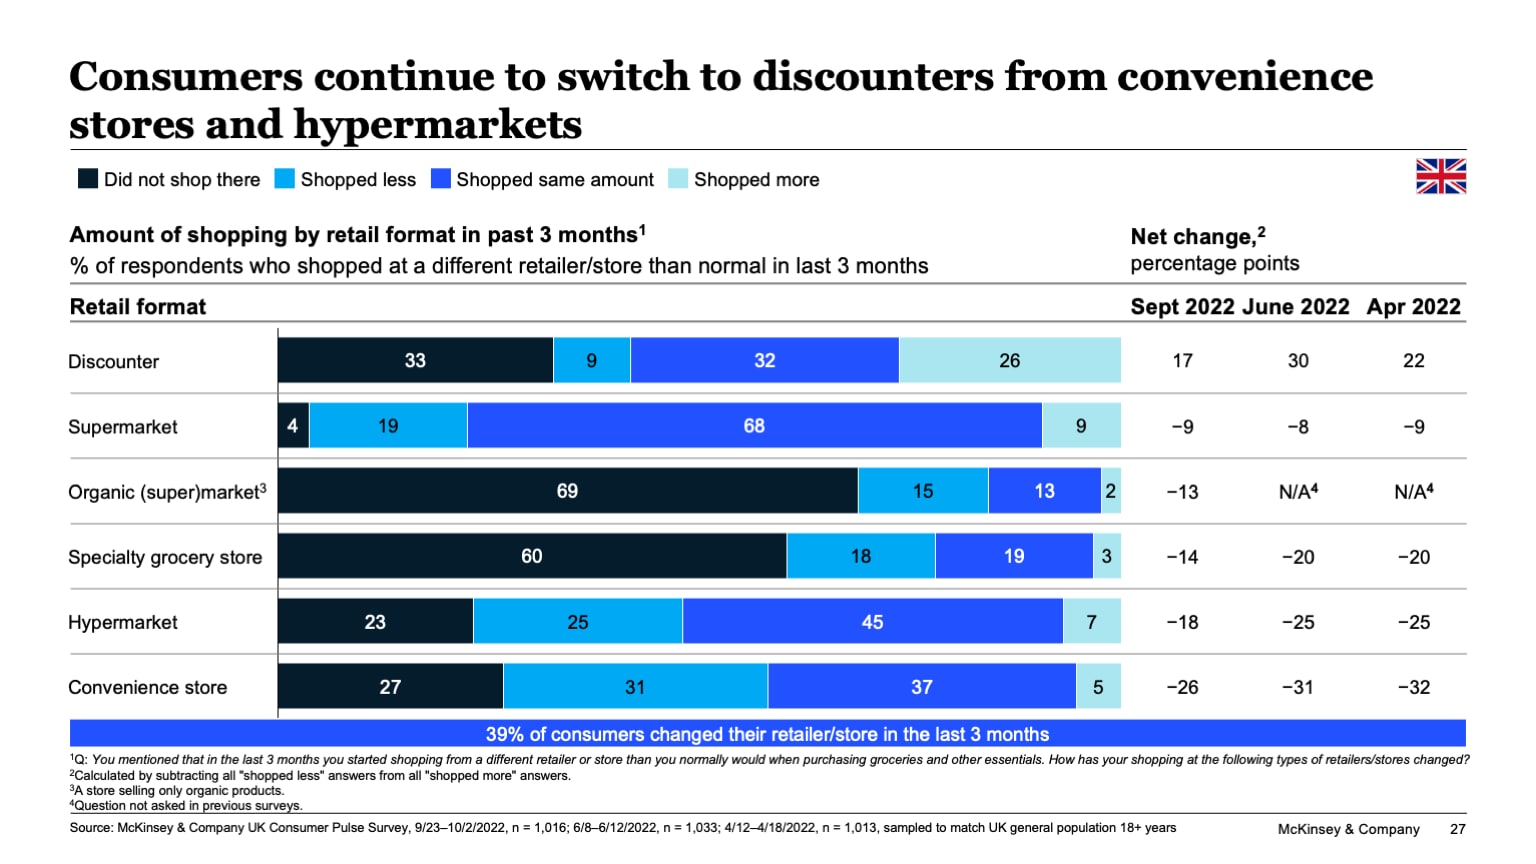 Consumers continue to switch to discounters from convenience stores and hypermarkets